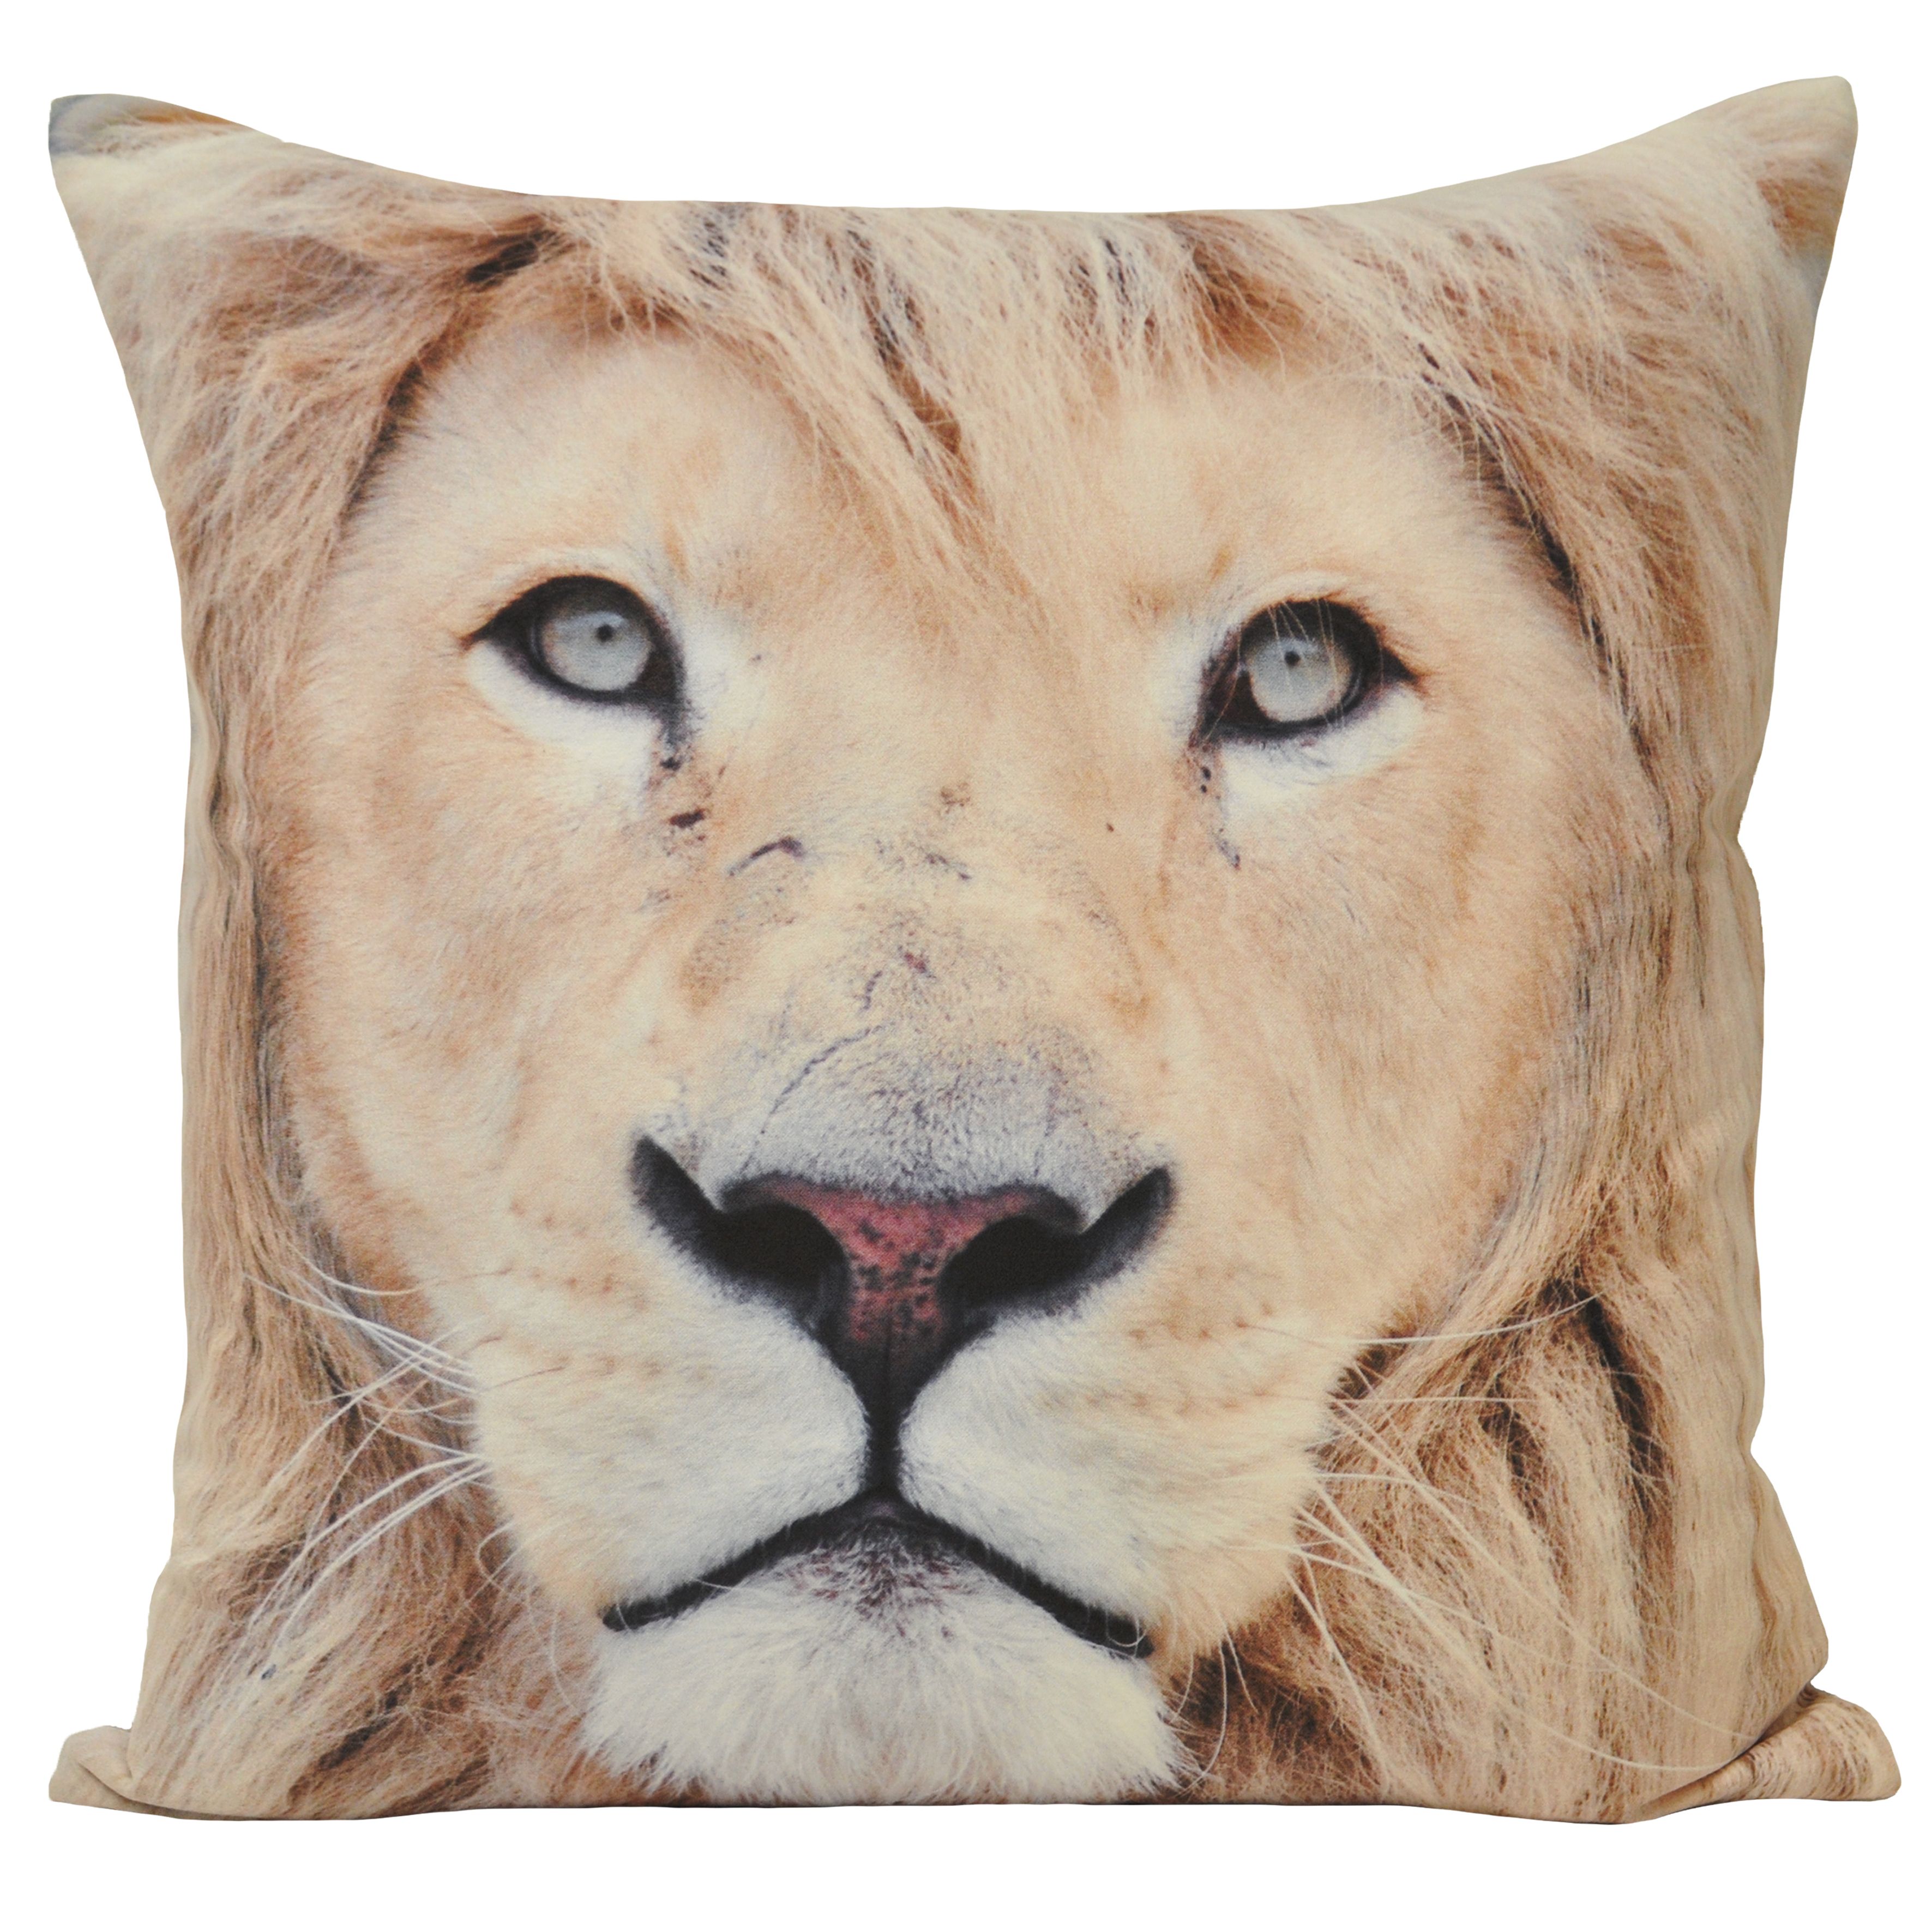 Show your wild side with the Paoletti Lion Animal Polyester Filled Cushion. Featuring a realistic print of a gorgeous white lion surrounded by its majestic mane it will be a definite talking point. This soft Polyester Filled Cushion is made of faux suede fabric giving it that notable leather-like feel with no harm to any animals in the process. With a hidden zip closure nothing will take away from this cushions unique design. Created with 100% hard-wearing polyester this will be a cushion you'll love for years to come. Unlike most faux suede this Polyester Filled Cushion is fully machine washable at 40 degrees, however we do not recommend using an iron.